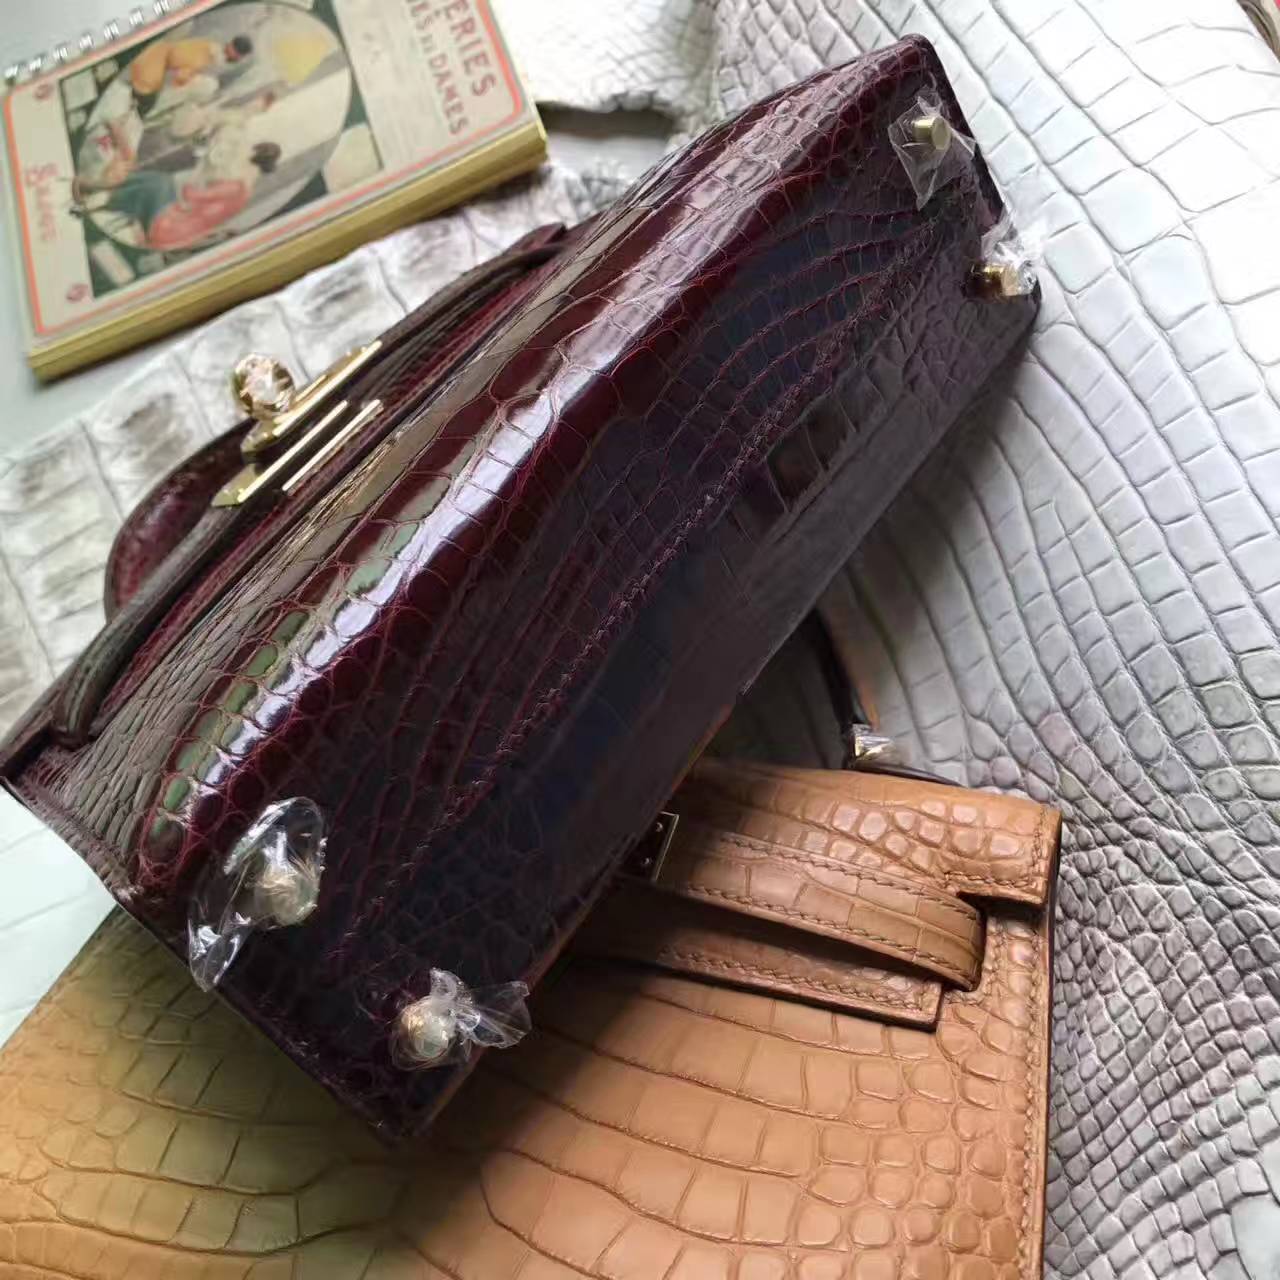 Hand Stitching Hermes Crocodile Shiny Minikelly-2 Clutch in CK57 Bordeaux